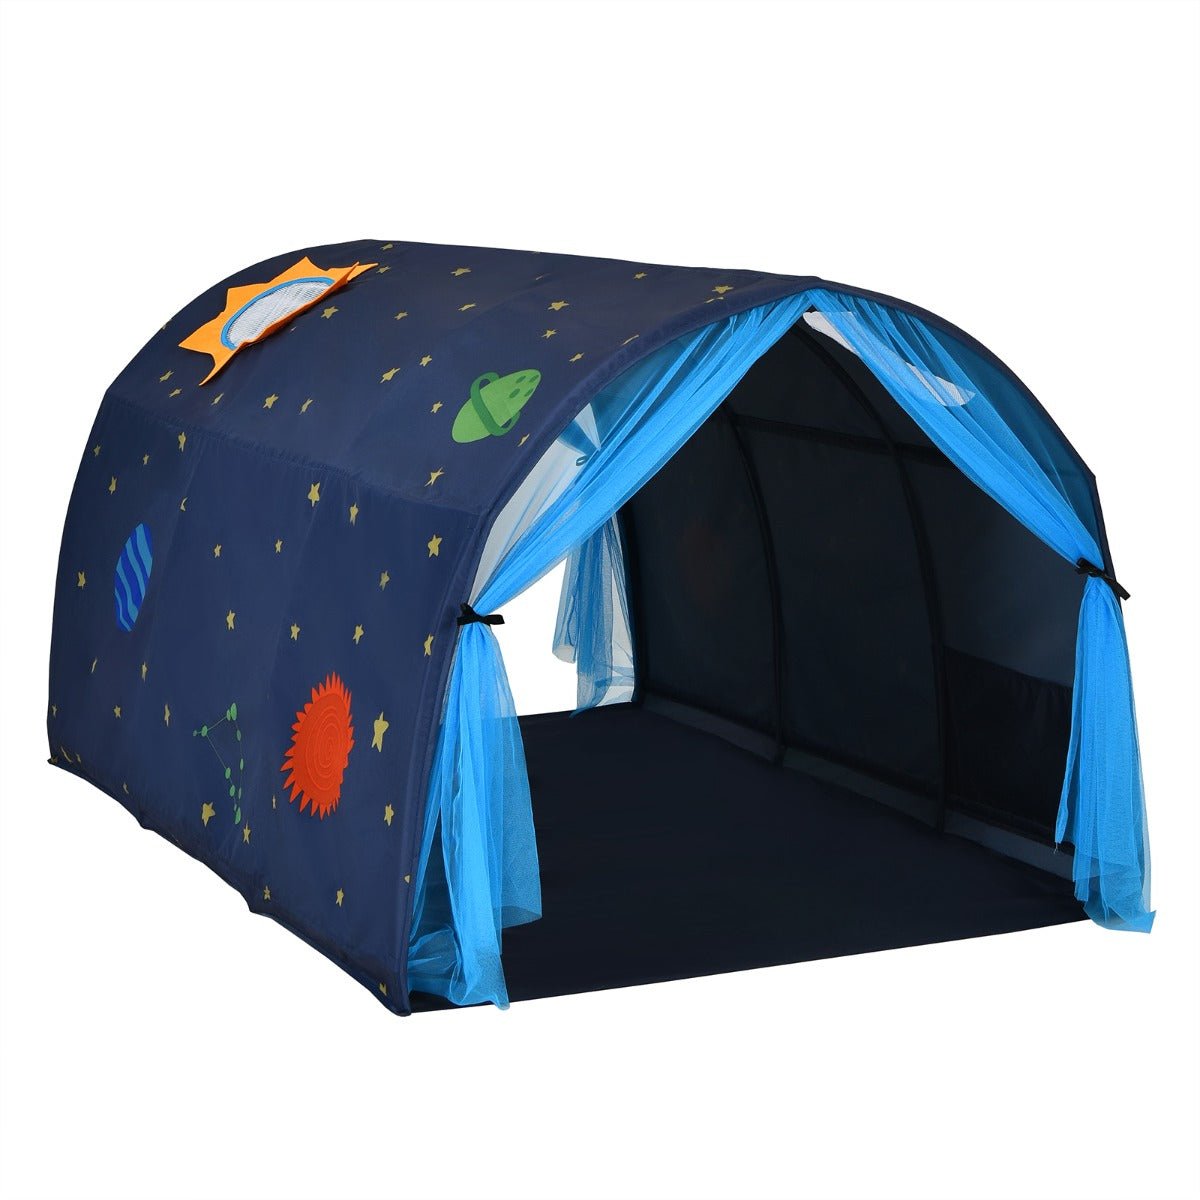 Twin Bedtime Retreat: Kids Sleeping Tent Playhouse with Carry Bag